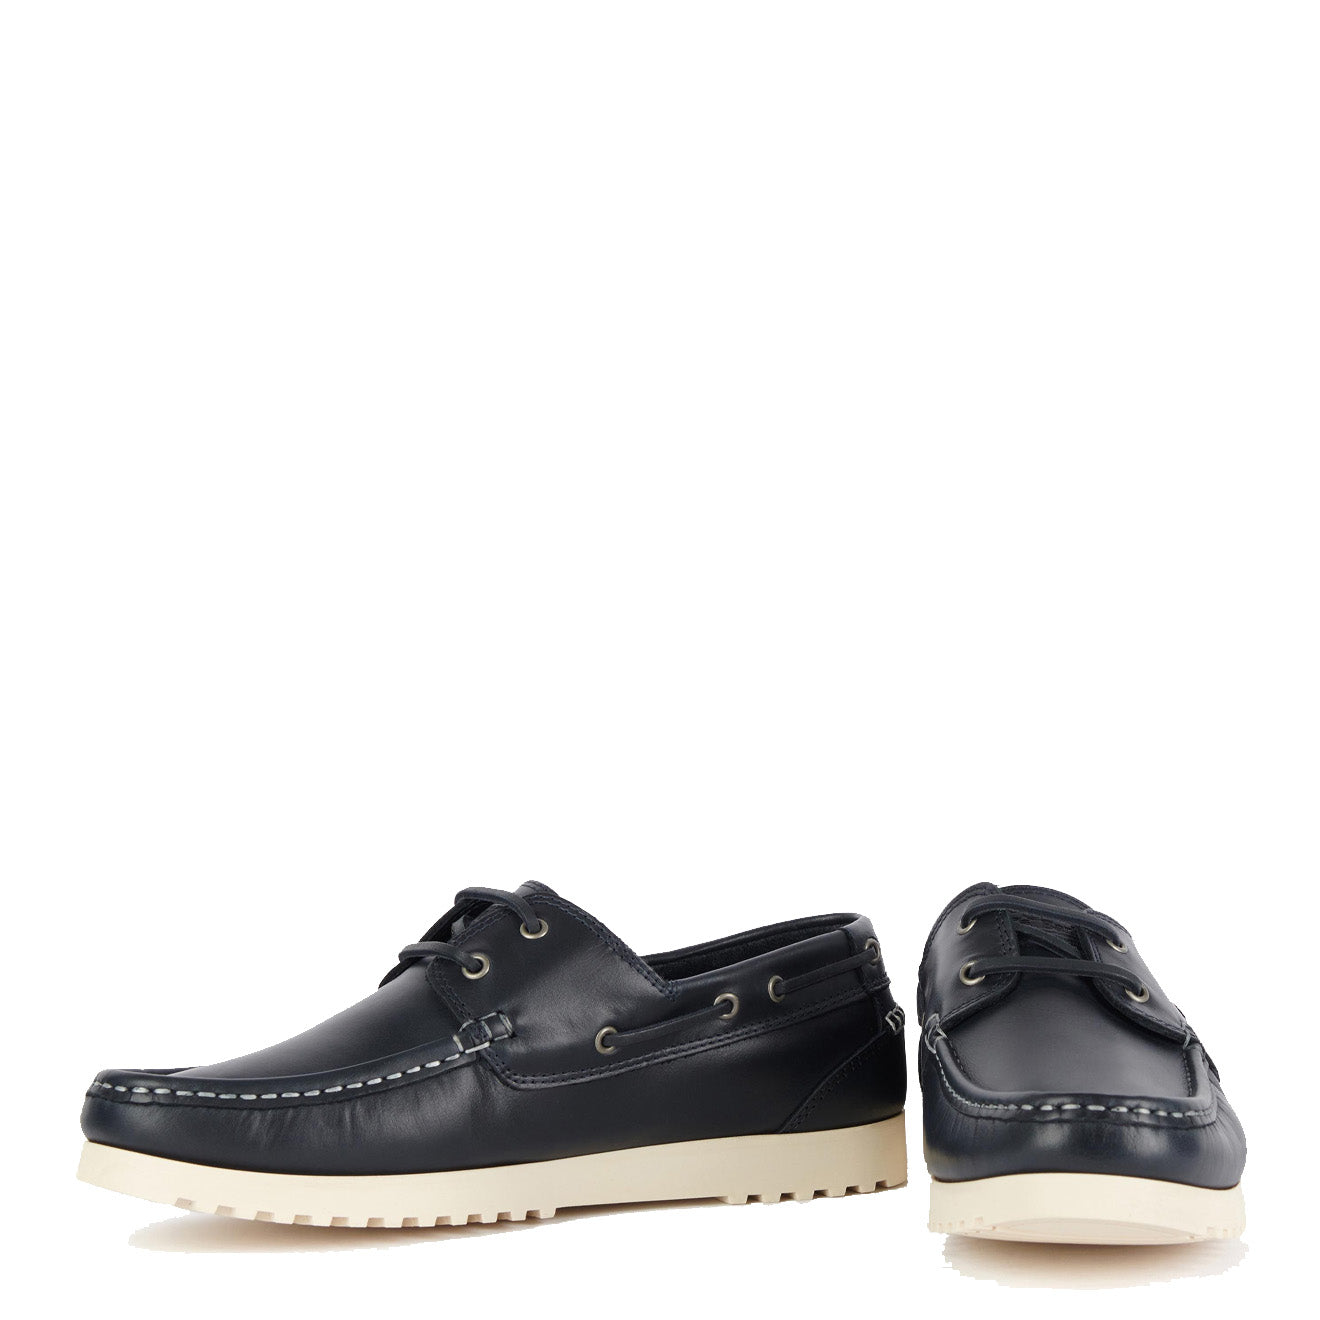 Barbour Seeker Shoe Navy | The Sporting Lodge